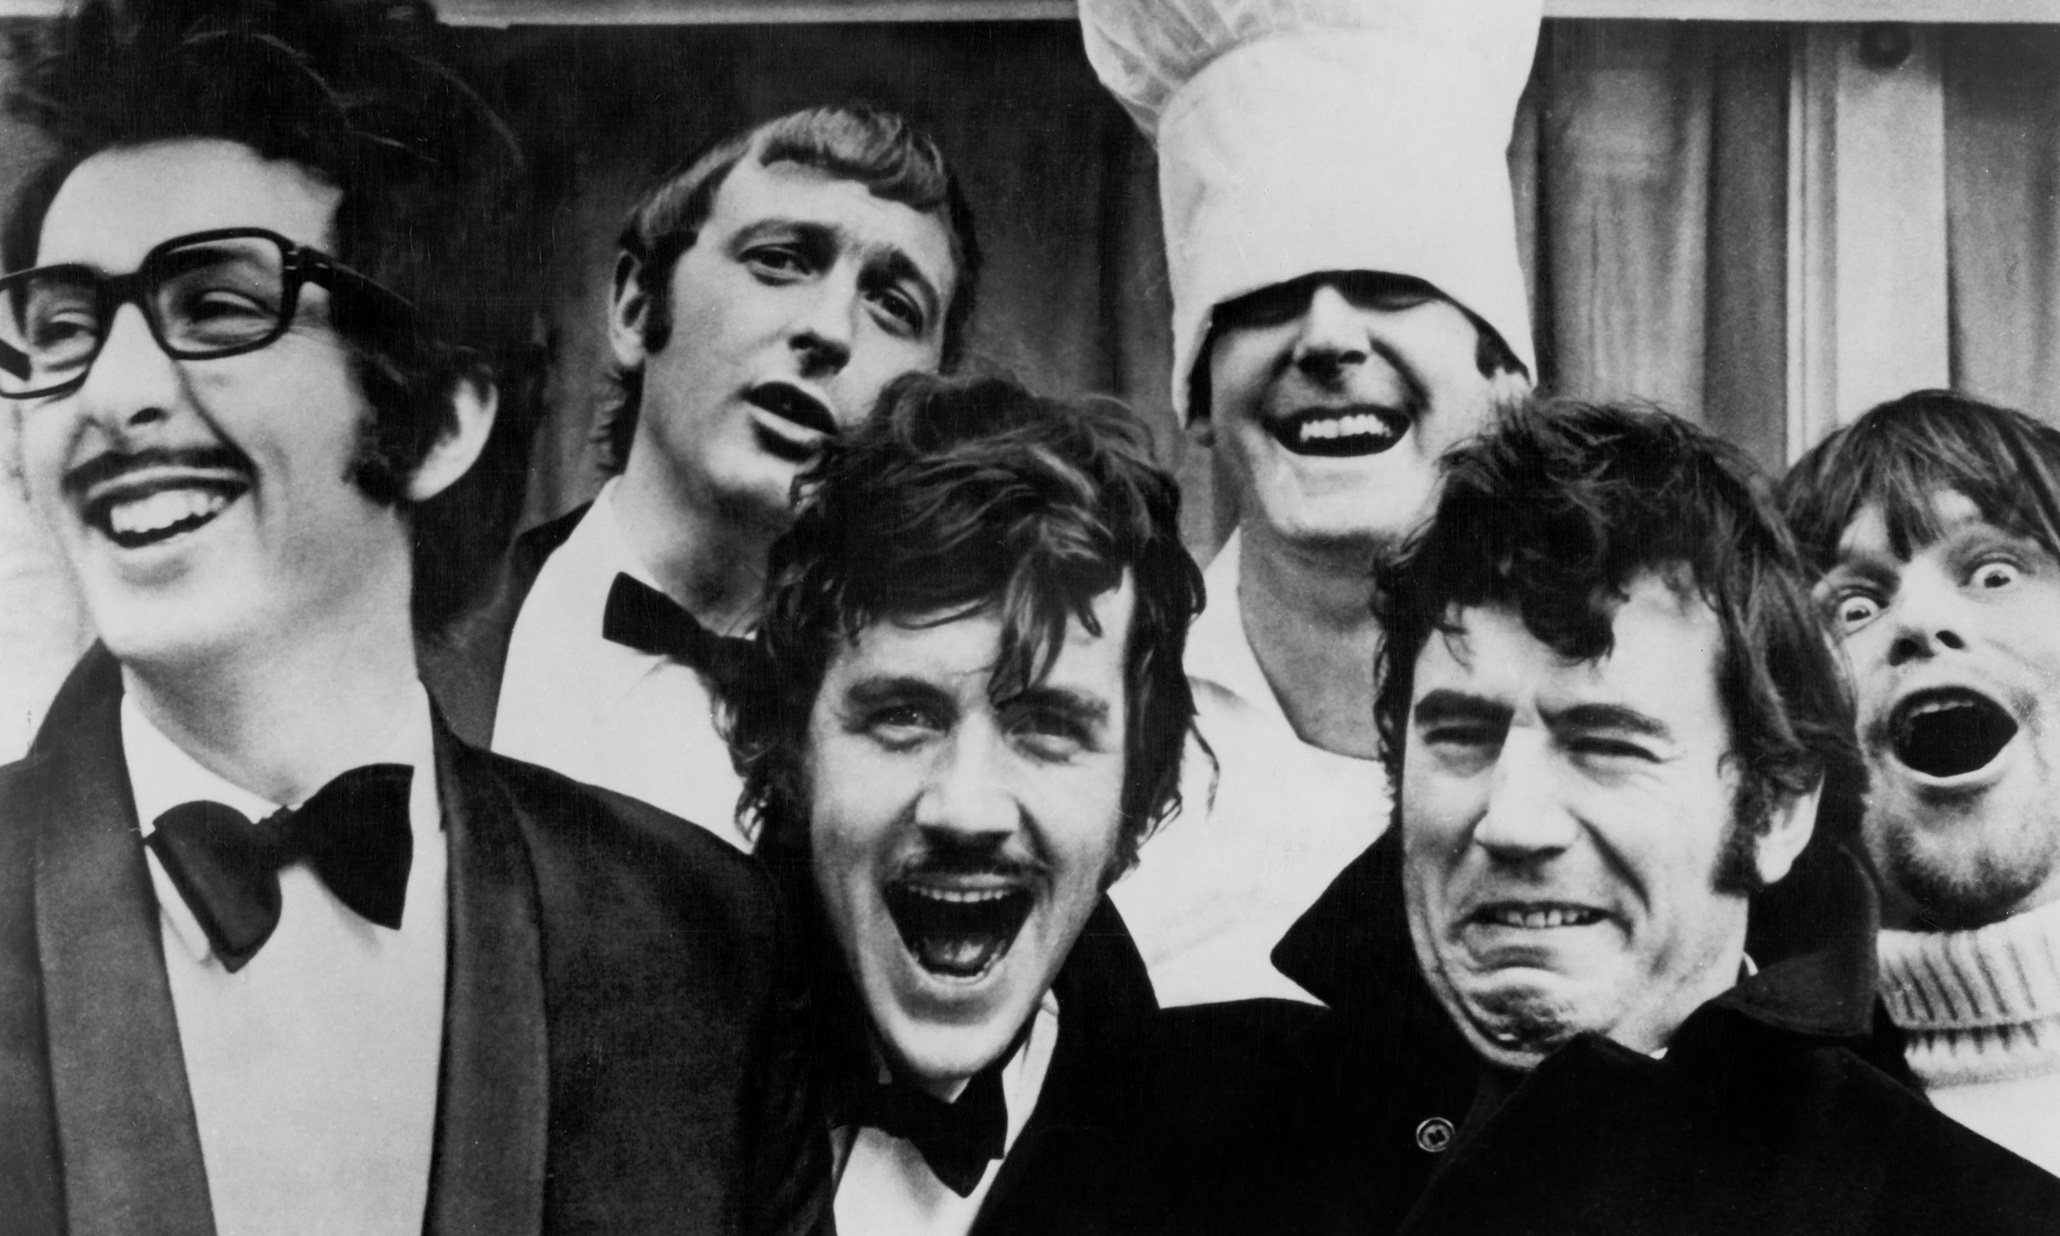 Monty Python films: rank them from best to worst | Film | The Guardian